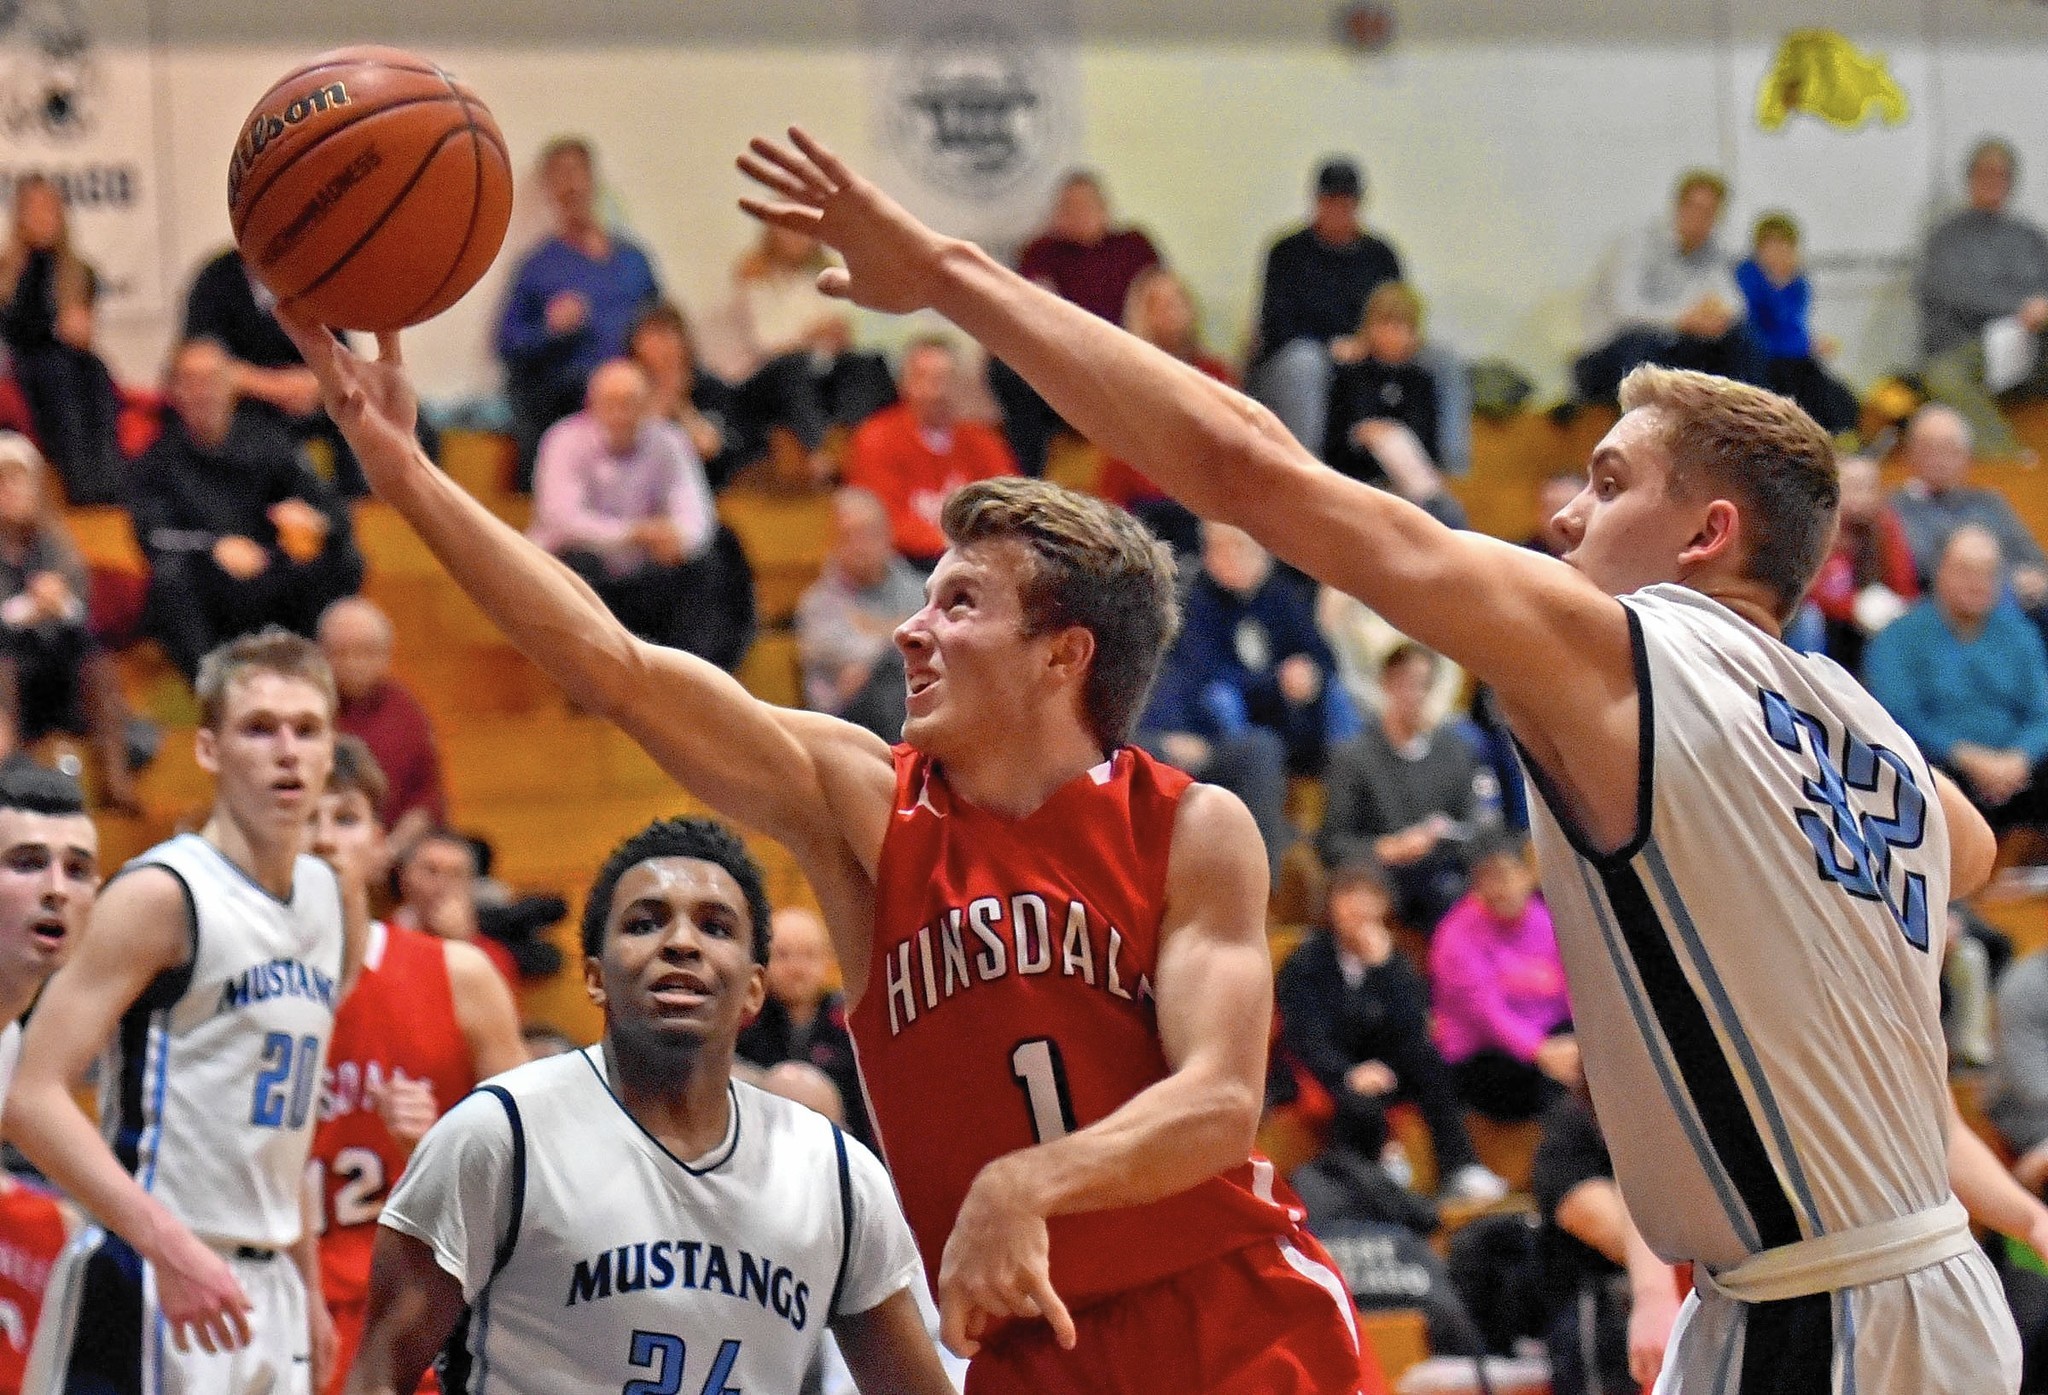 Hinsdale Central's Jack Hoiberg to walk on for Michigan State basketball - The Doings ...